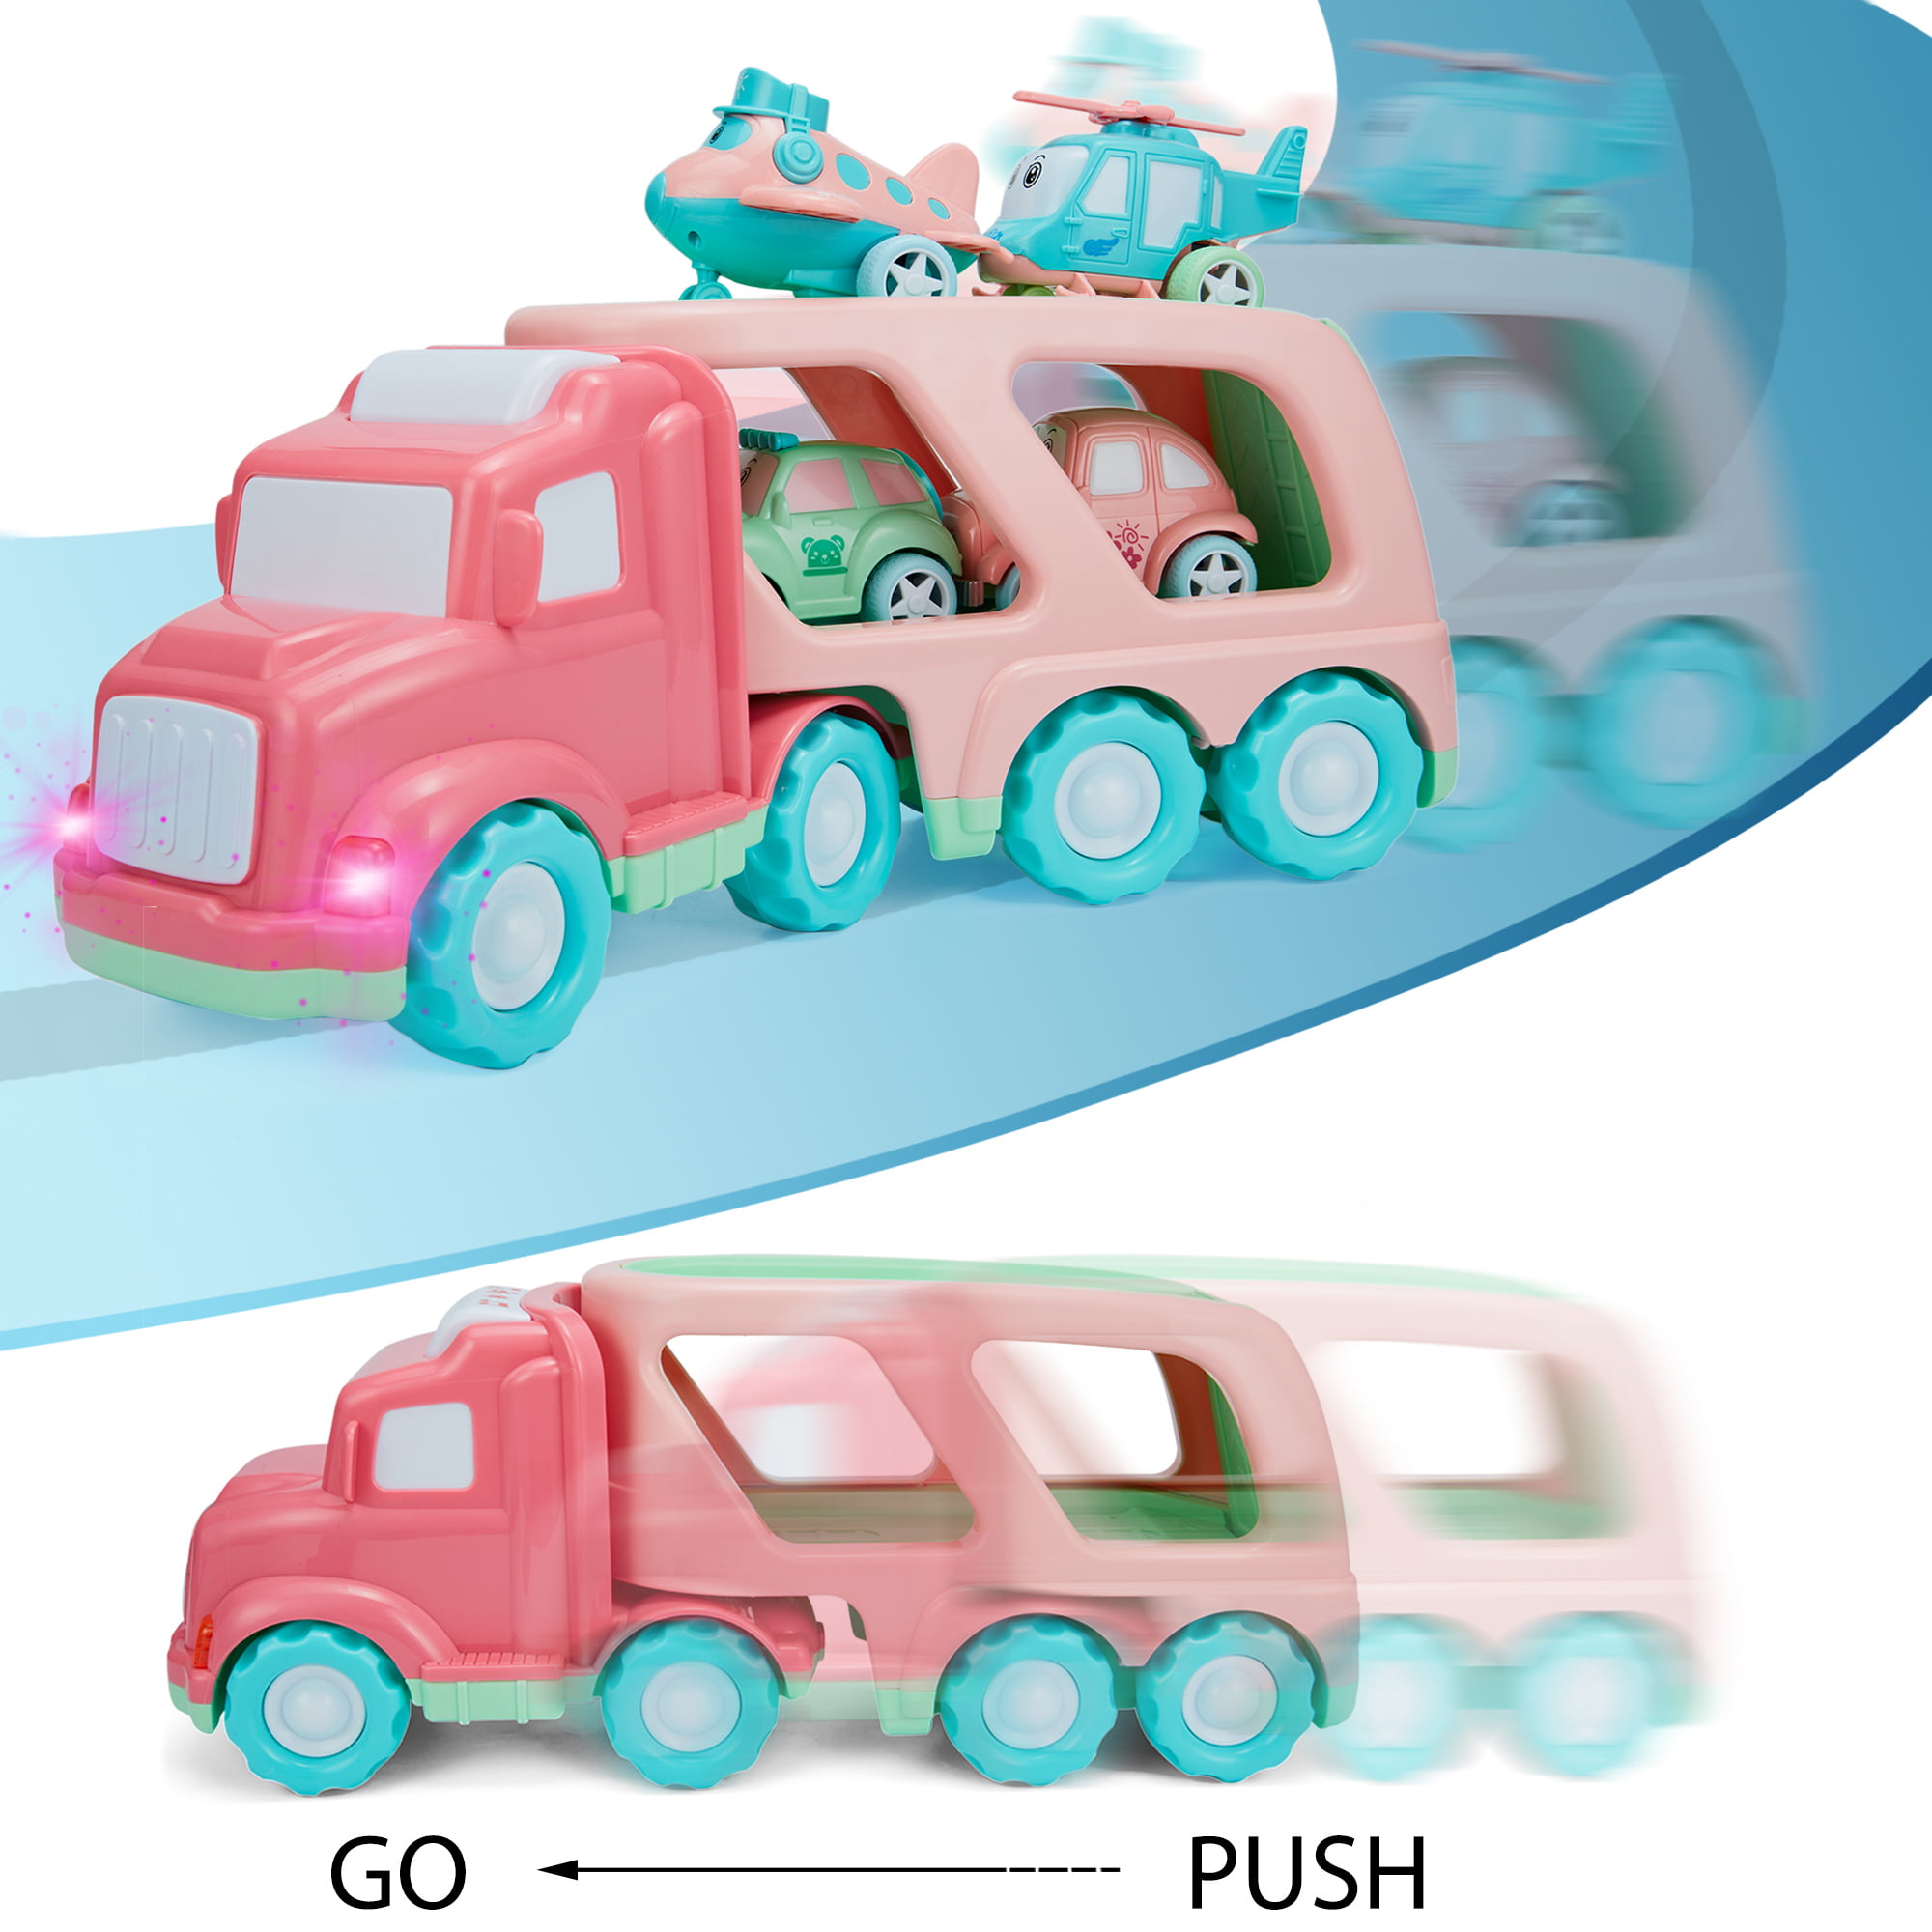 Details about   Carrier Truck Transportation Mini Cartoon Toys Christmas Birthday Gifts for Kids